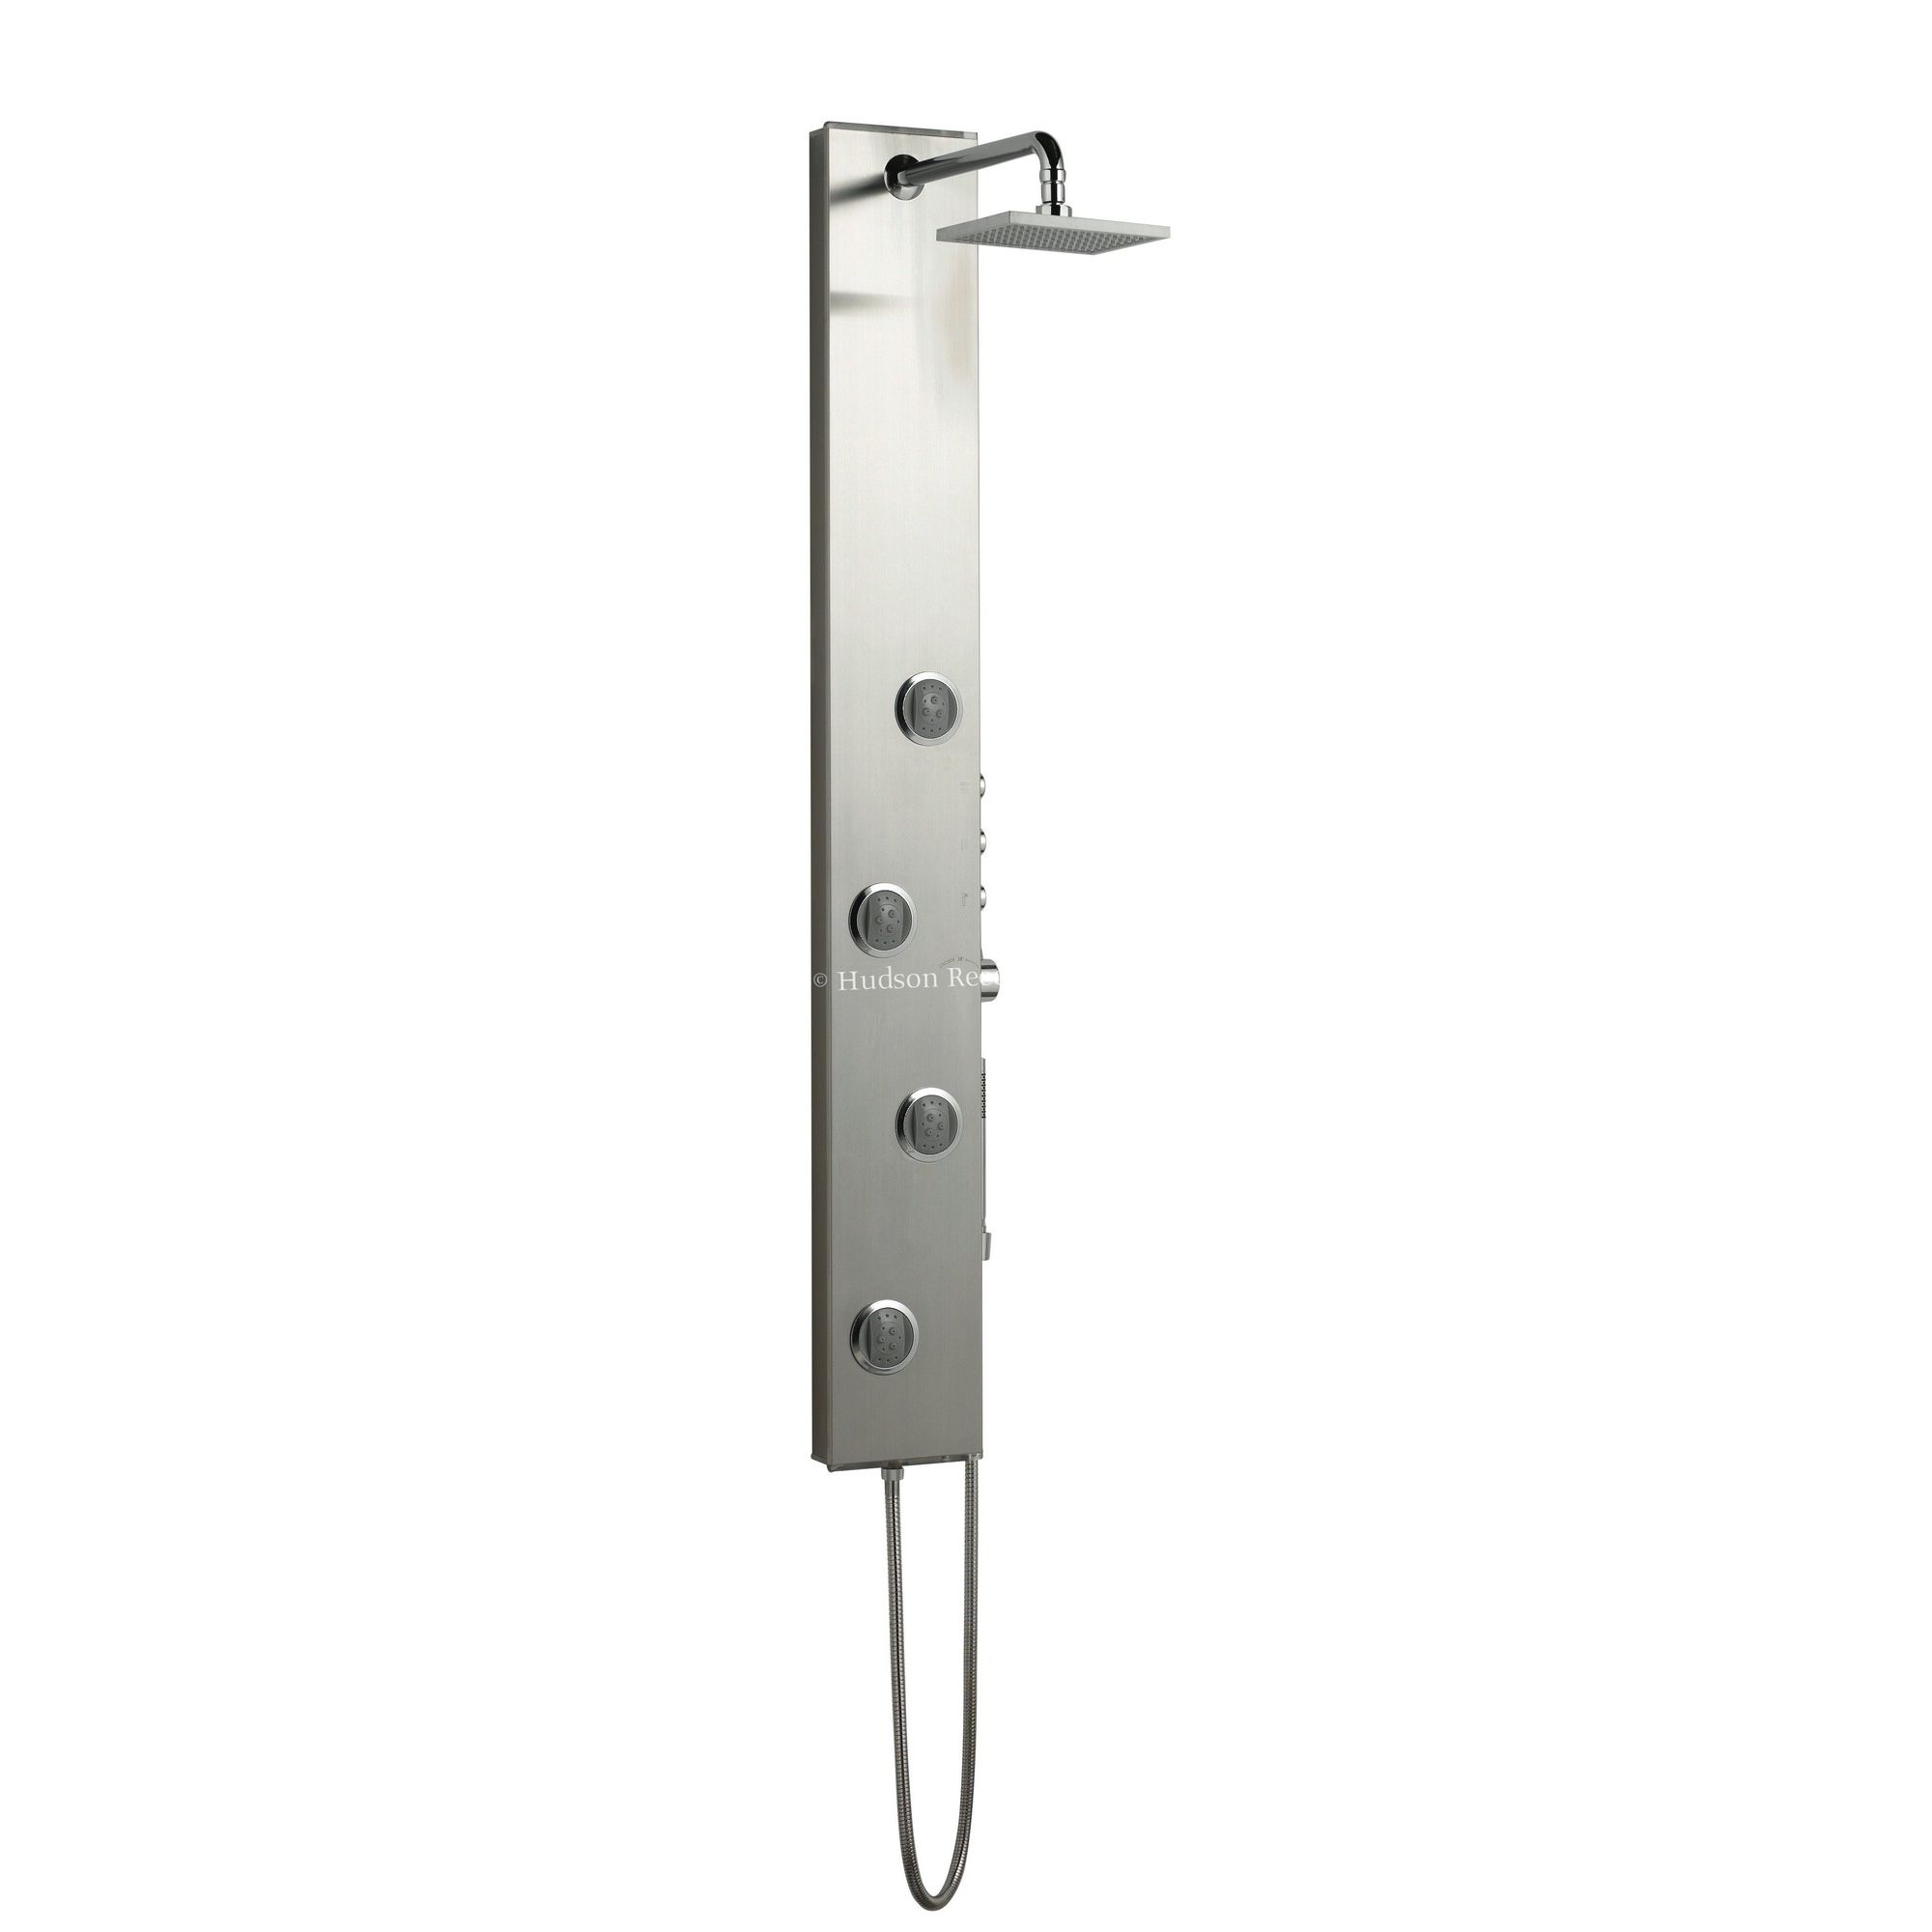 Hudson Reed Theme Stainless Steel Thermostatic Shower Panel at Tesco Direct